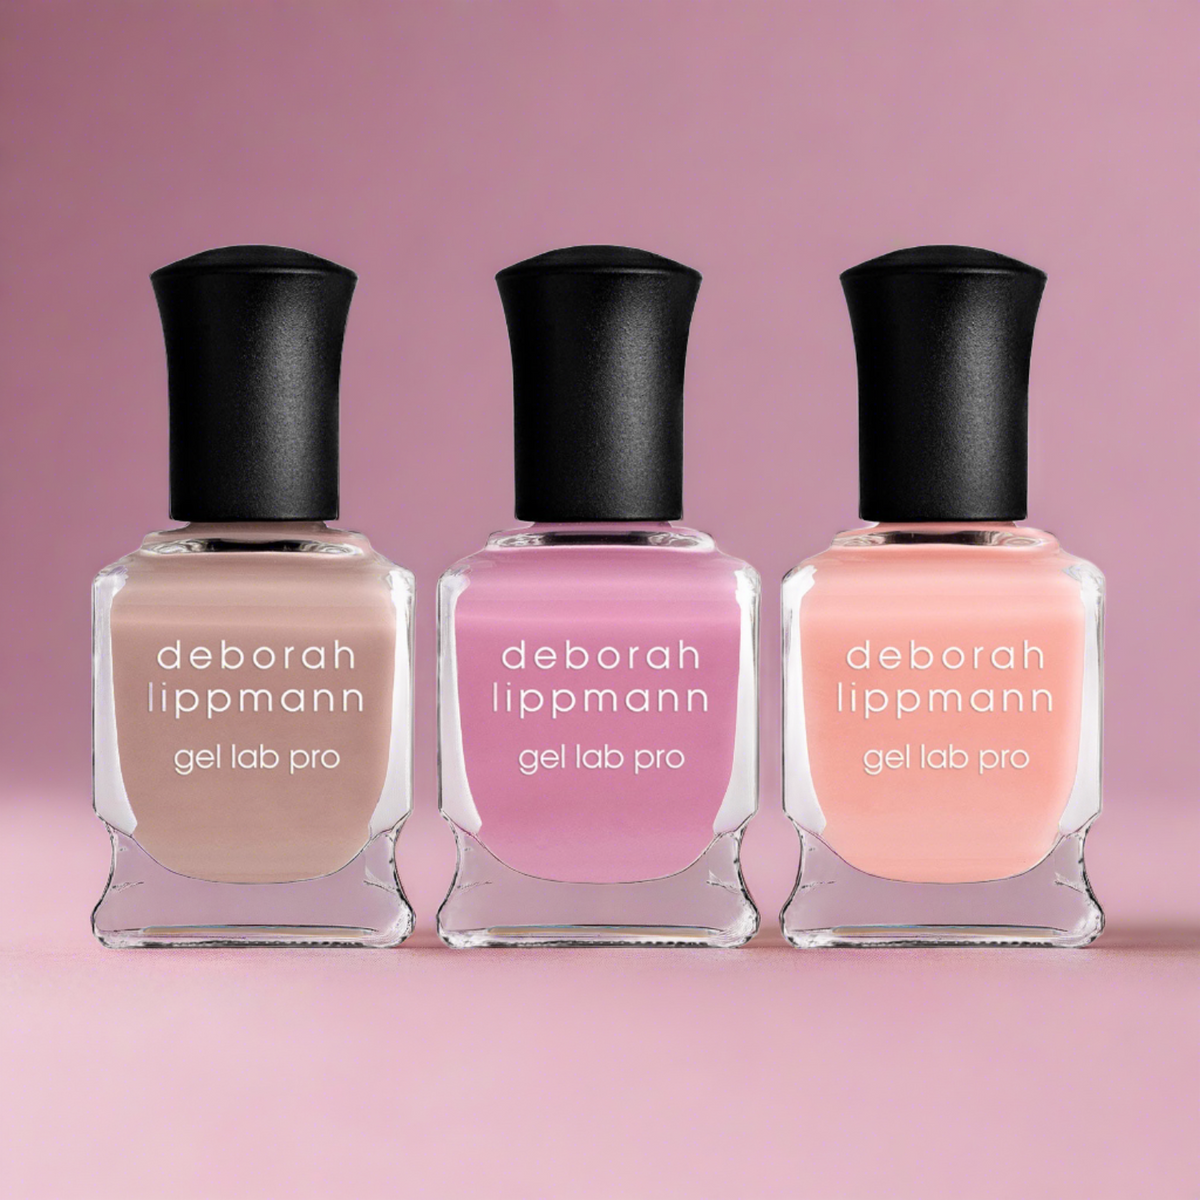 dreamy collection 3 polish shades in bottles